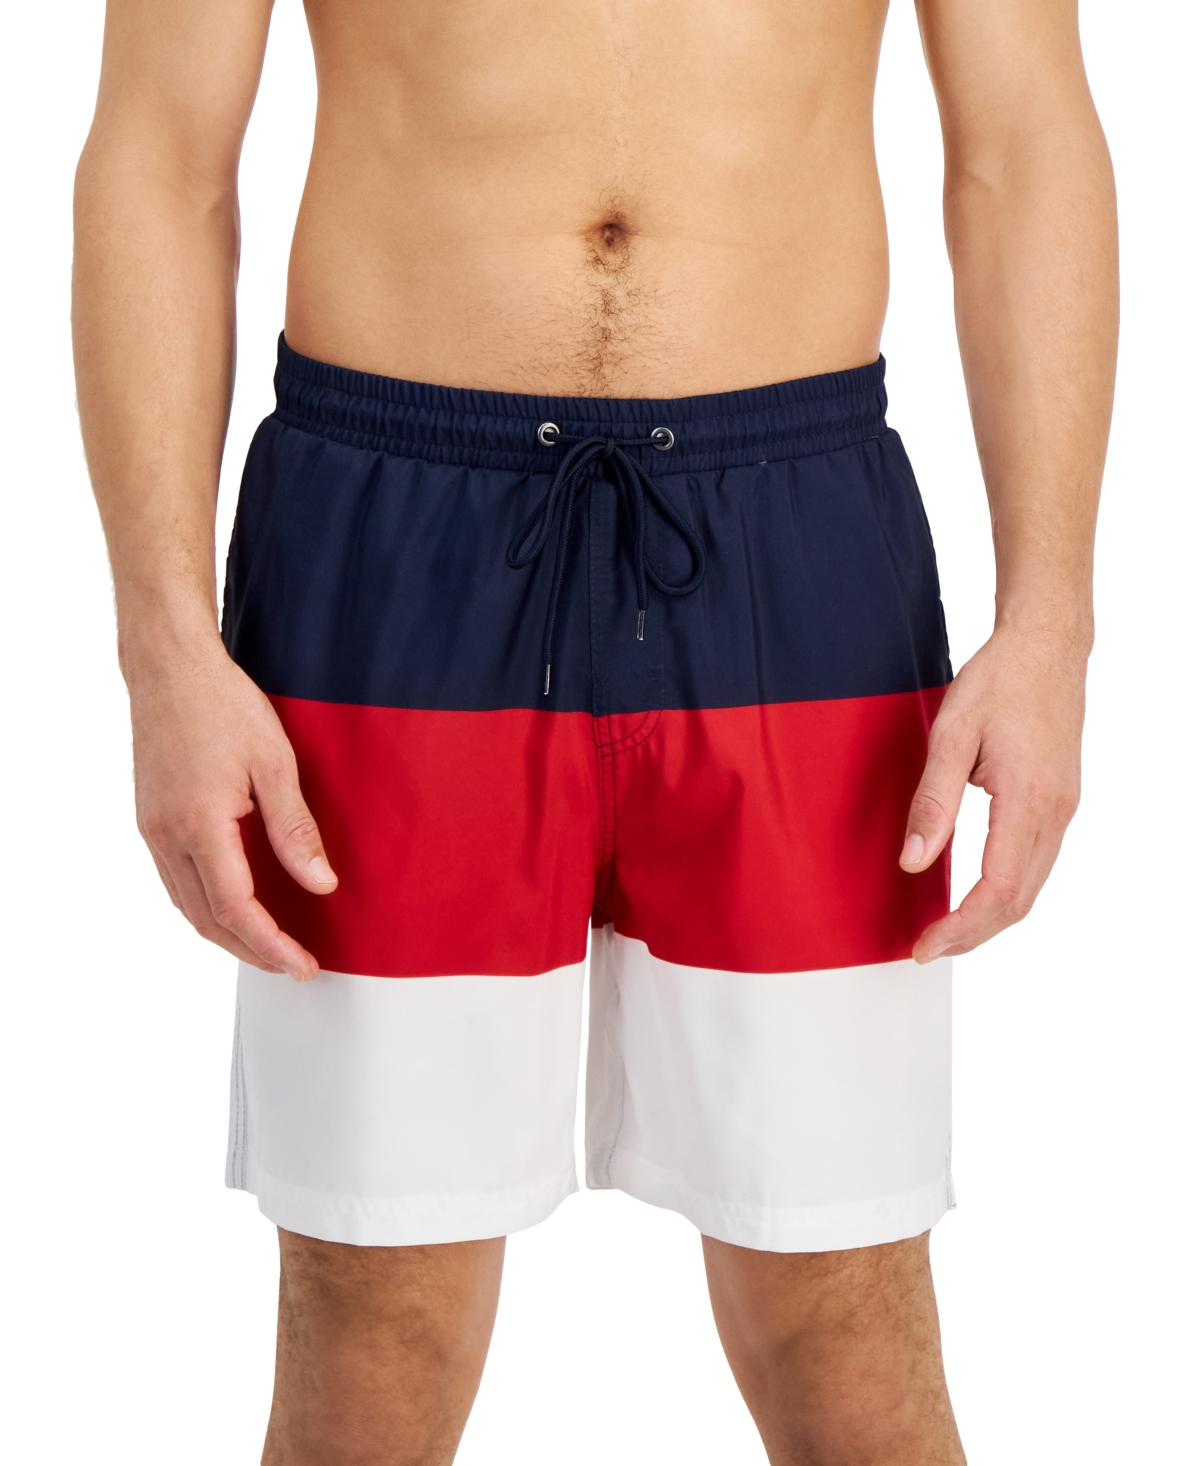 Men's Colorblocked 7" Swim Trunks, Created for Macy's - Pink Combo